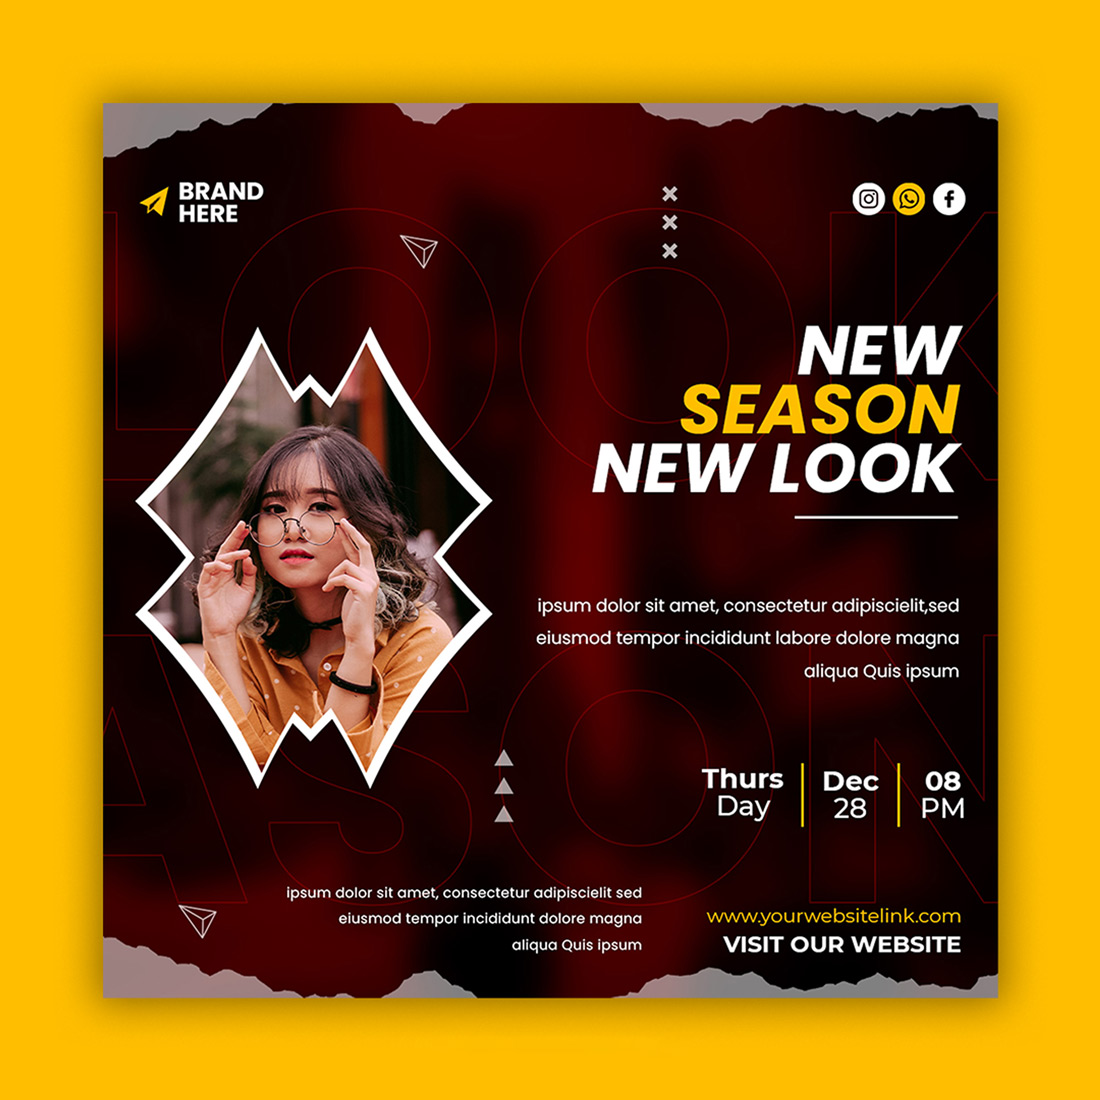 Flyer for a new season event with a photo of a woman talking on a.